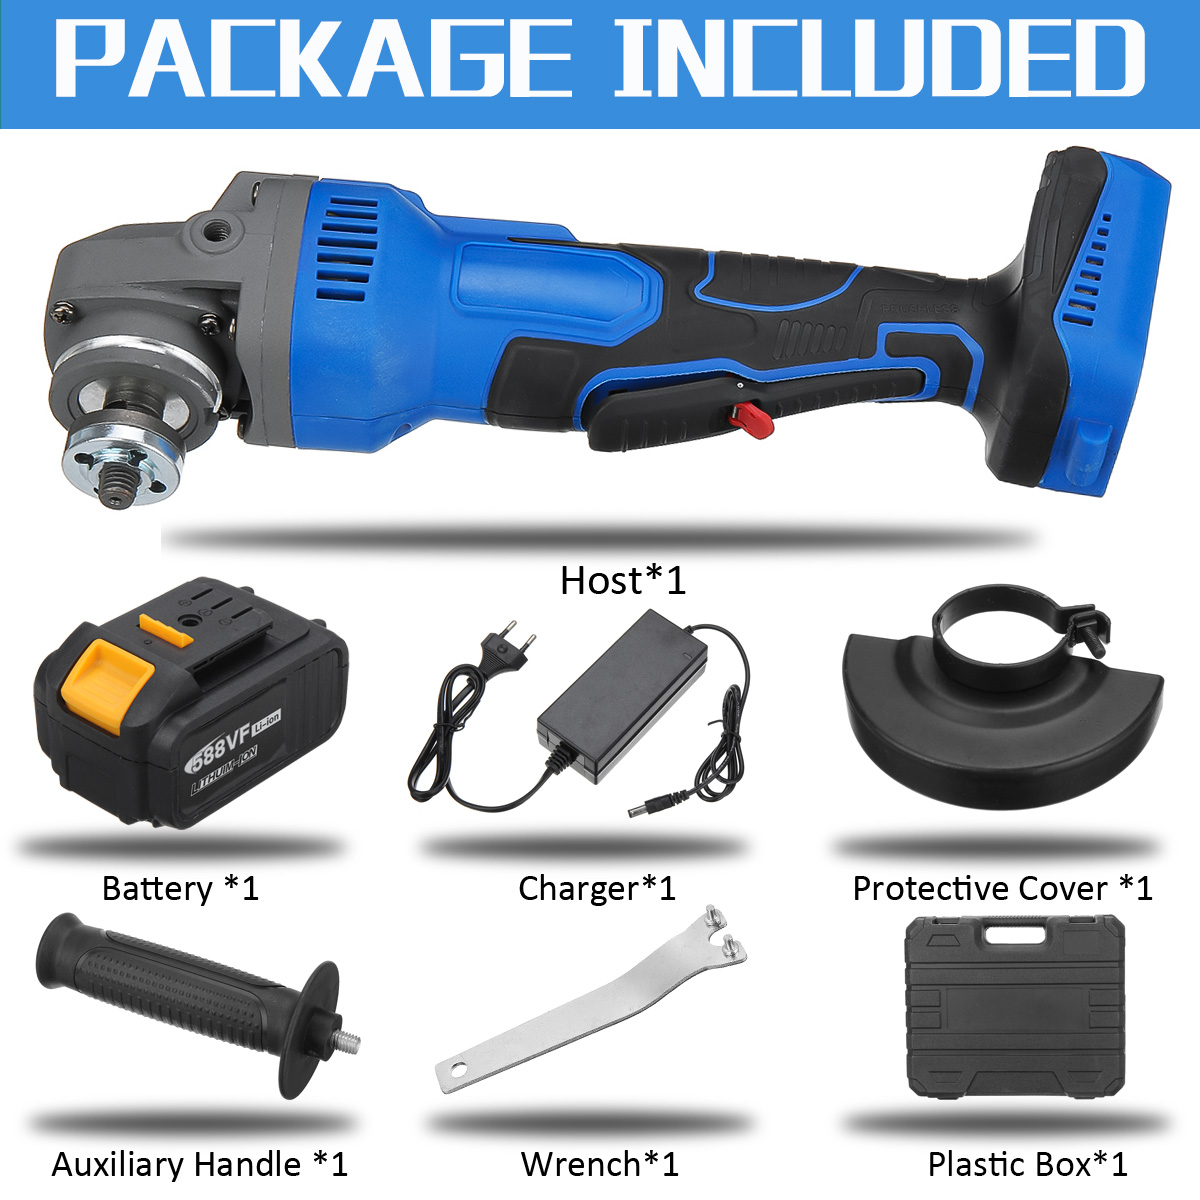 588VF-Cordless-Brushless-100mm-1580W-Electric-Angle-Grinder-3-Gears-Adjustable-Grinding-Machine-Poli-1941456-2